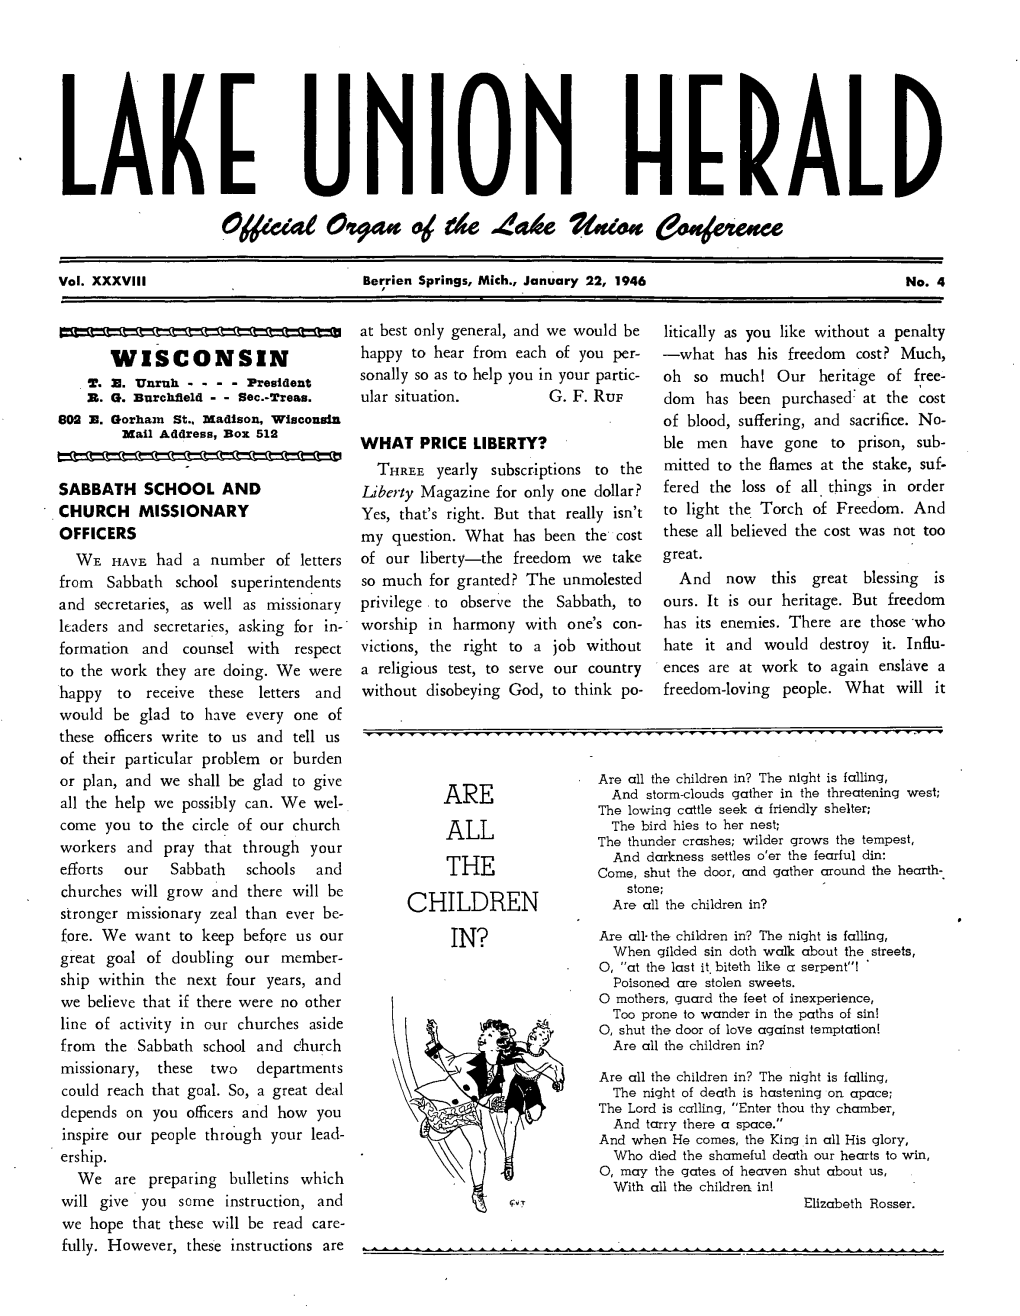 Lake Union Herald for 1946